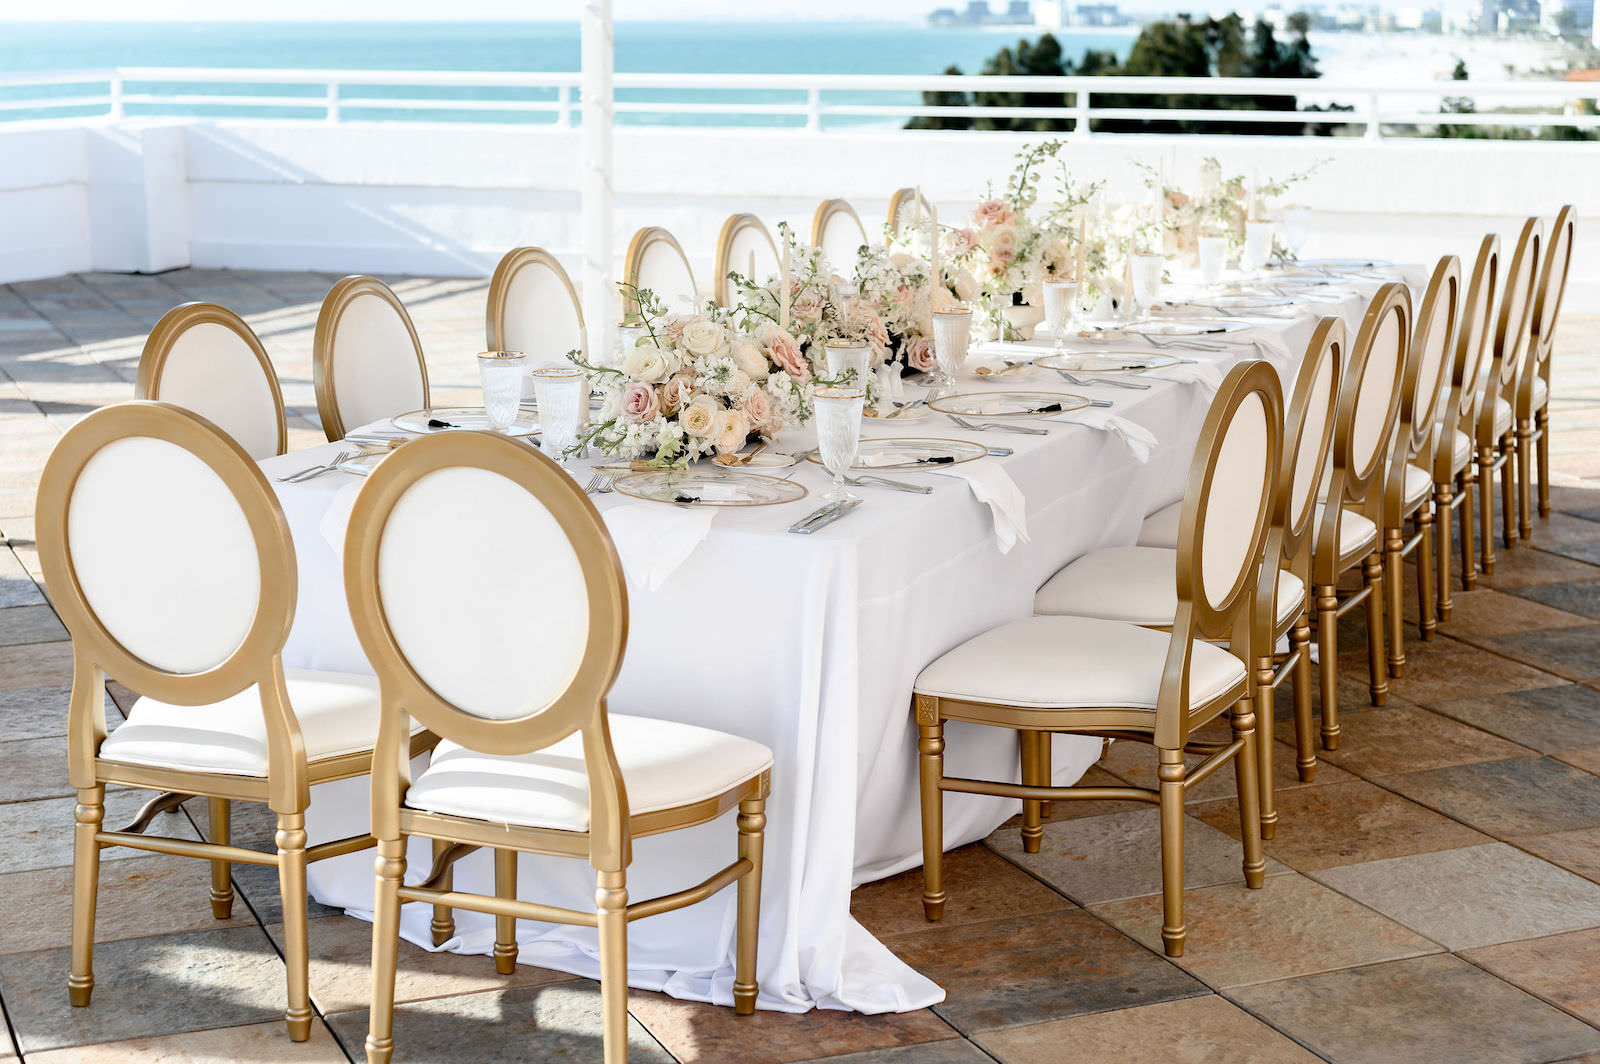 Elegant Classic Waterfront Rooftop Wedding Reception Decor, Long Feasting Table with Gold and White Dining Chairs, Low Floral Centerpieces and White Linens | Tampa Bay Wedding Planner Elegant Affairs by Design | Wedding Rentals Kate Ryan Event Rentals | Historic Pink Palace St. Pete Wedding Venue The Don CeSar Hotel